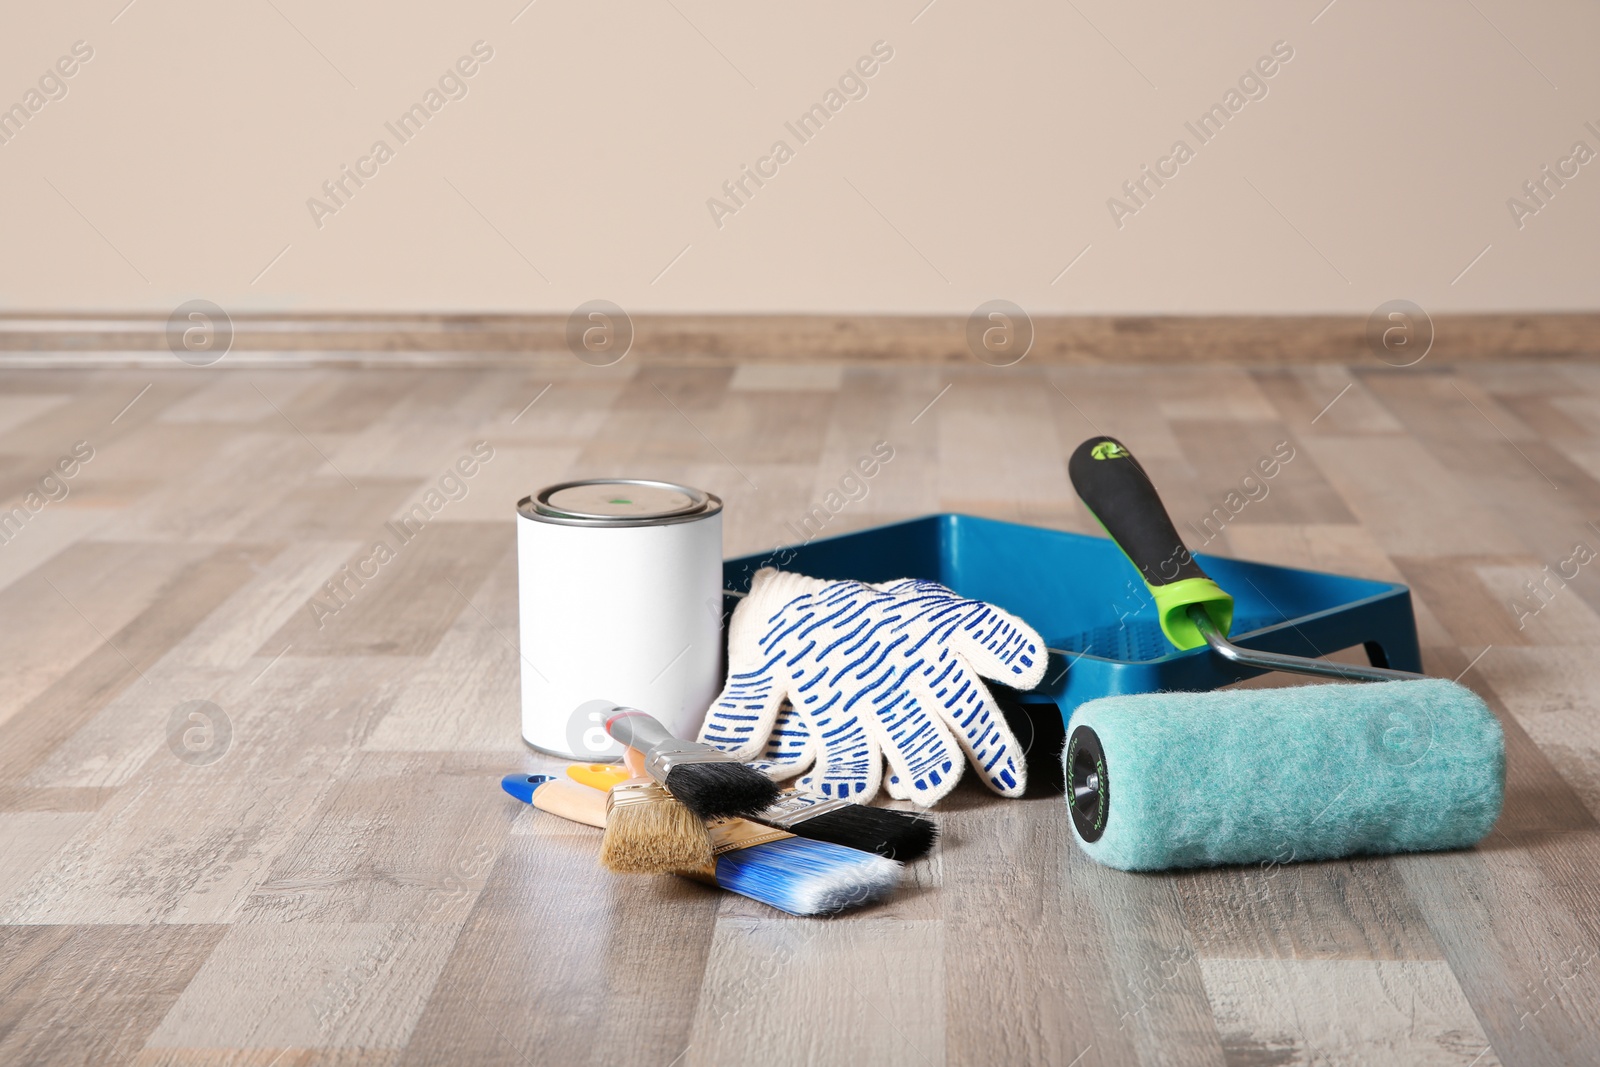 Photo of Can of paint and decorator tools on wooden floor indoors